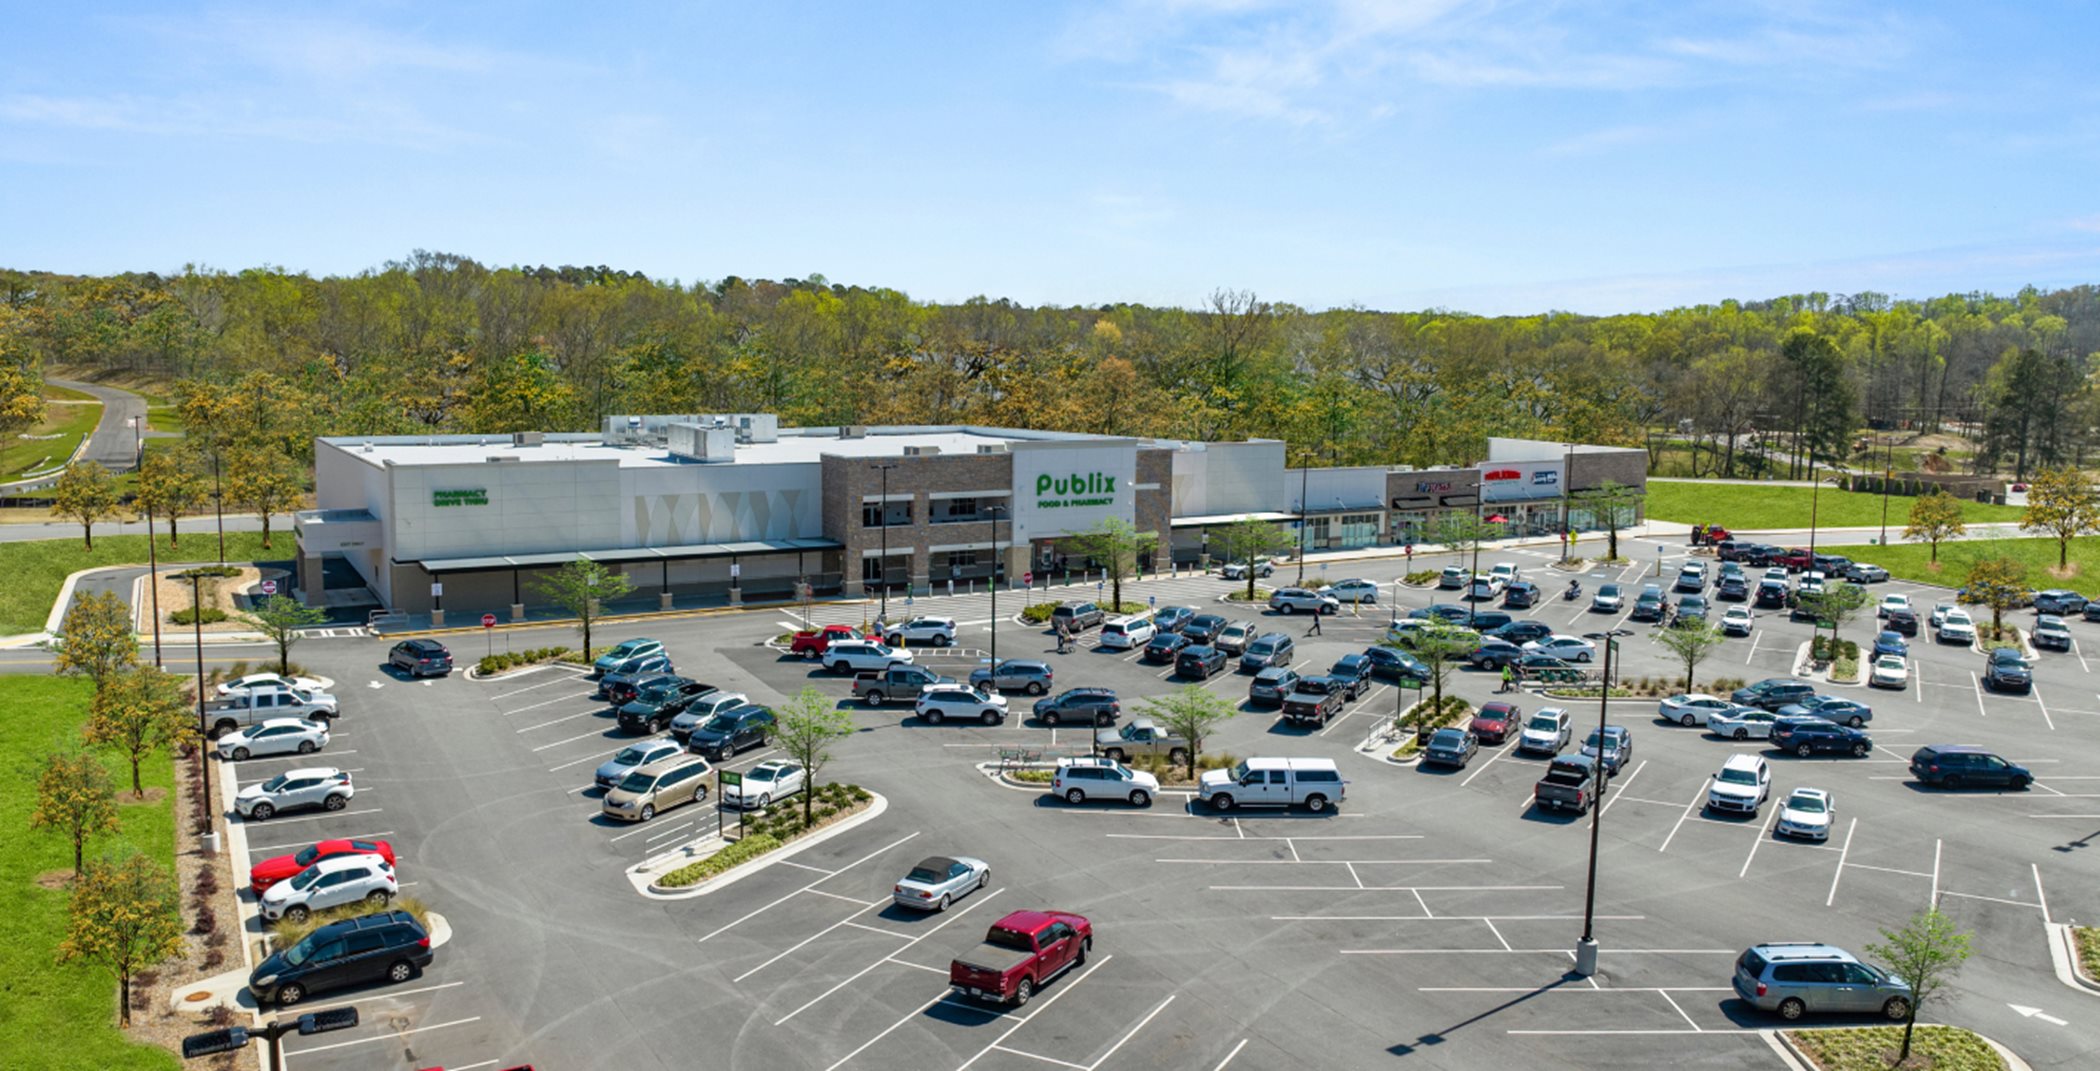 Gateway Crossing features large retail stores